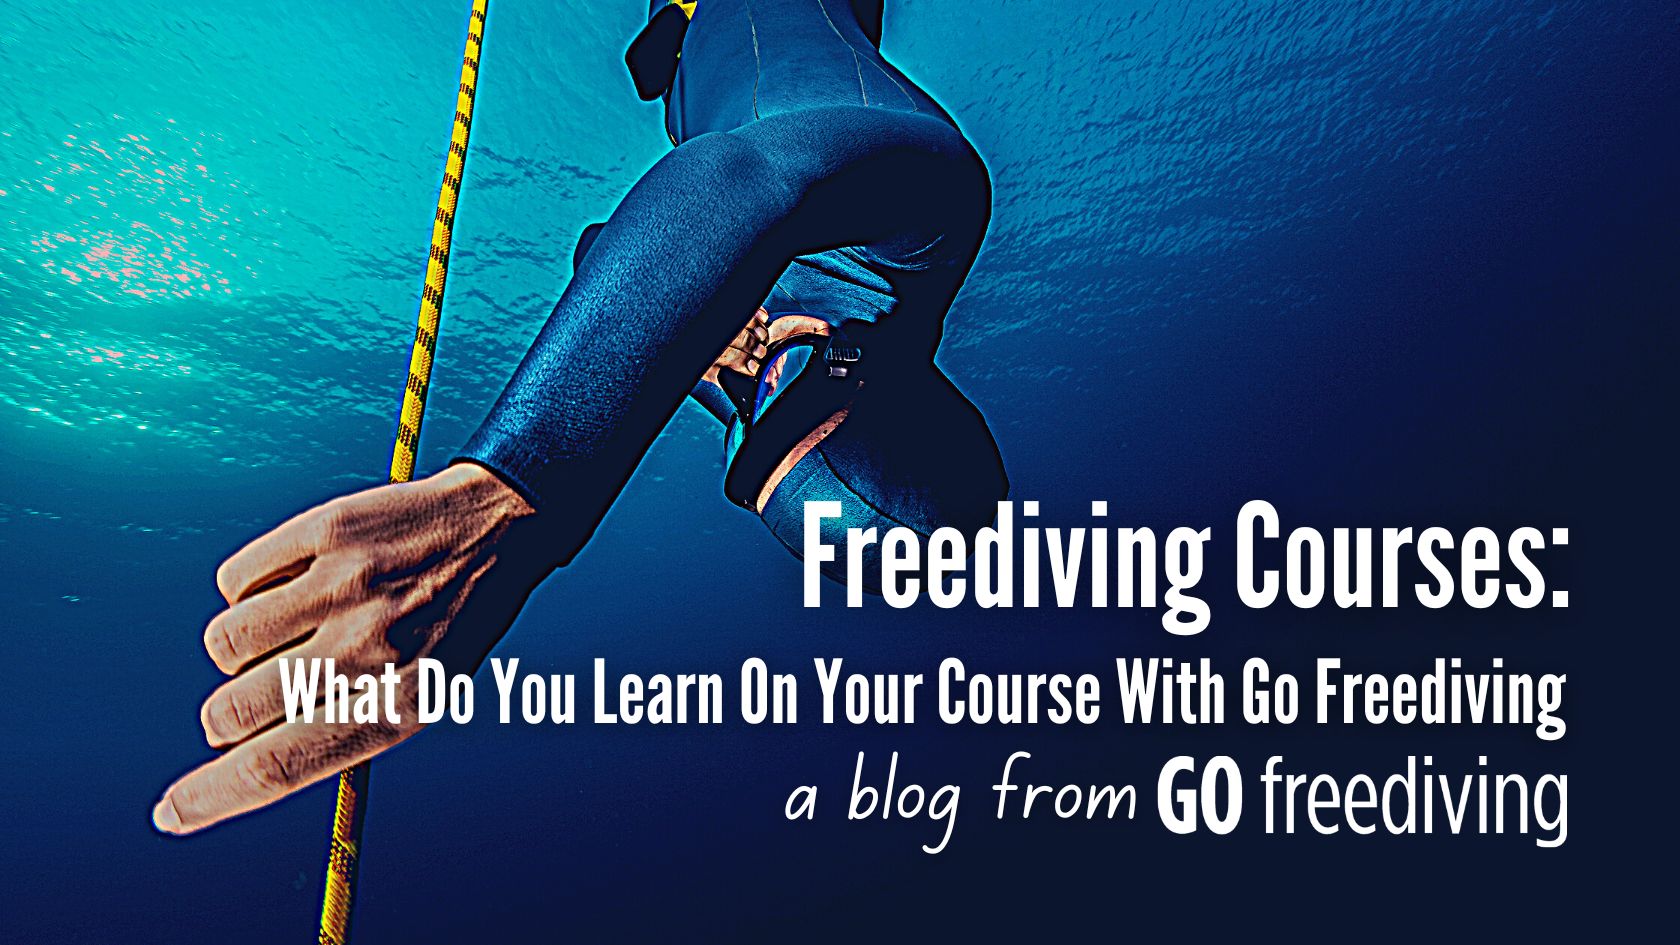 courses with Go Freediving